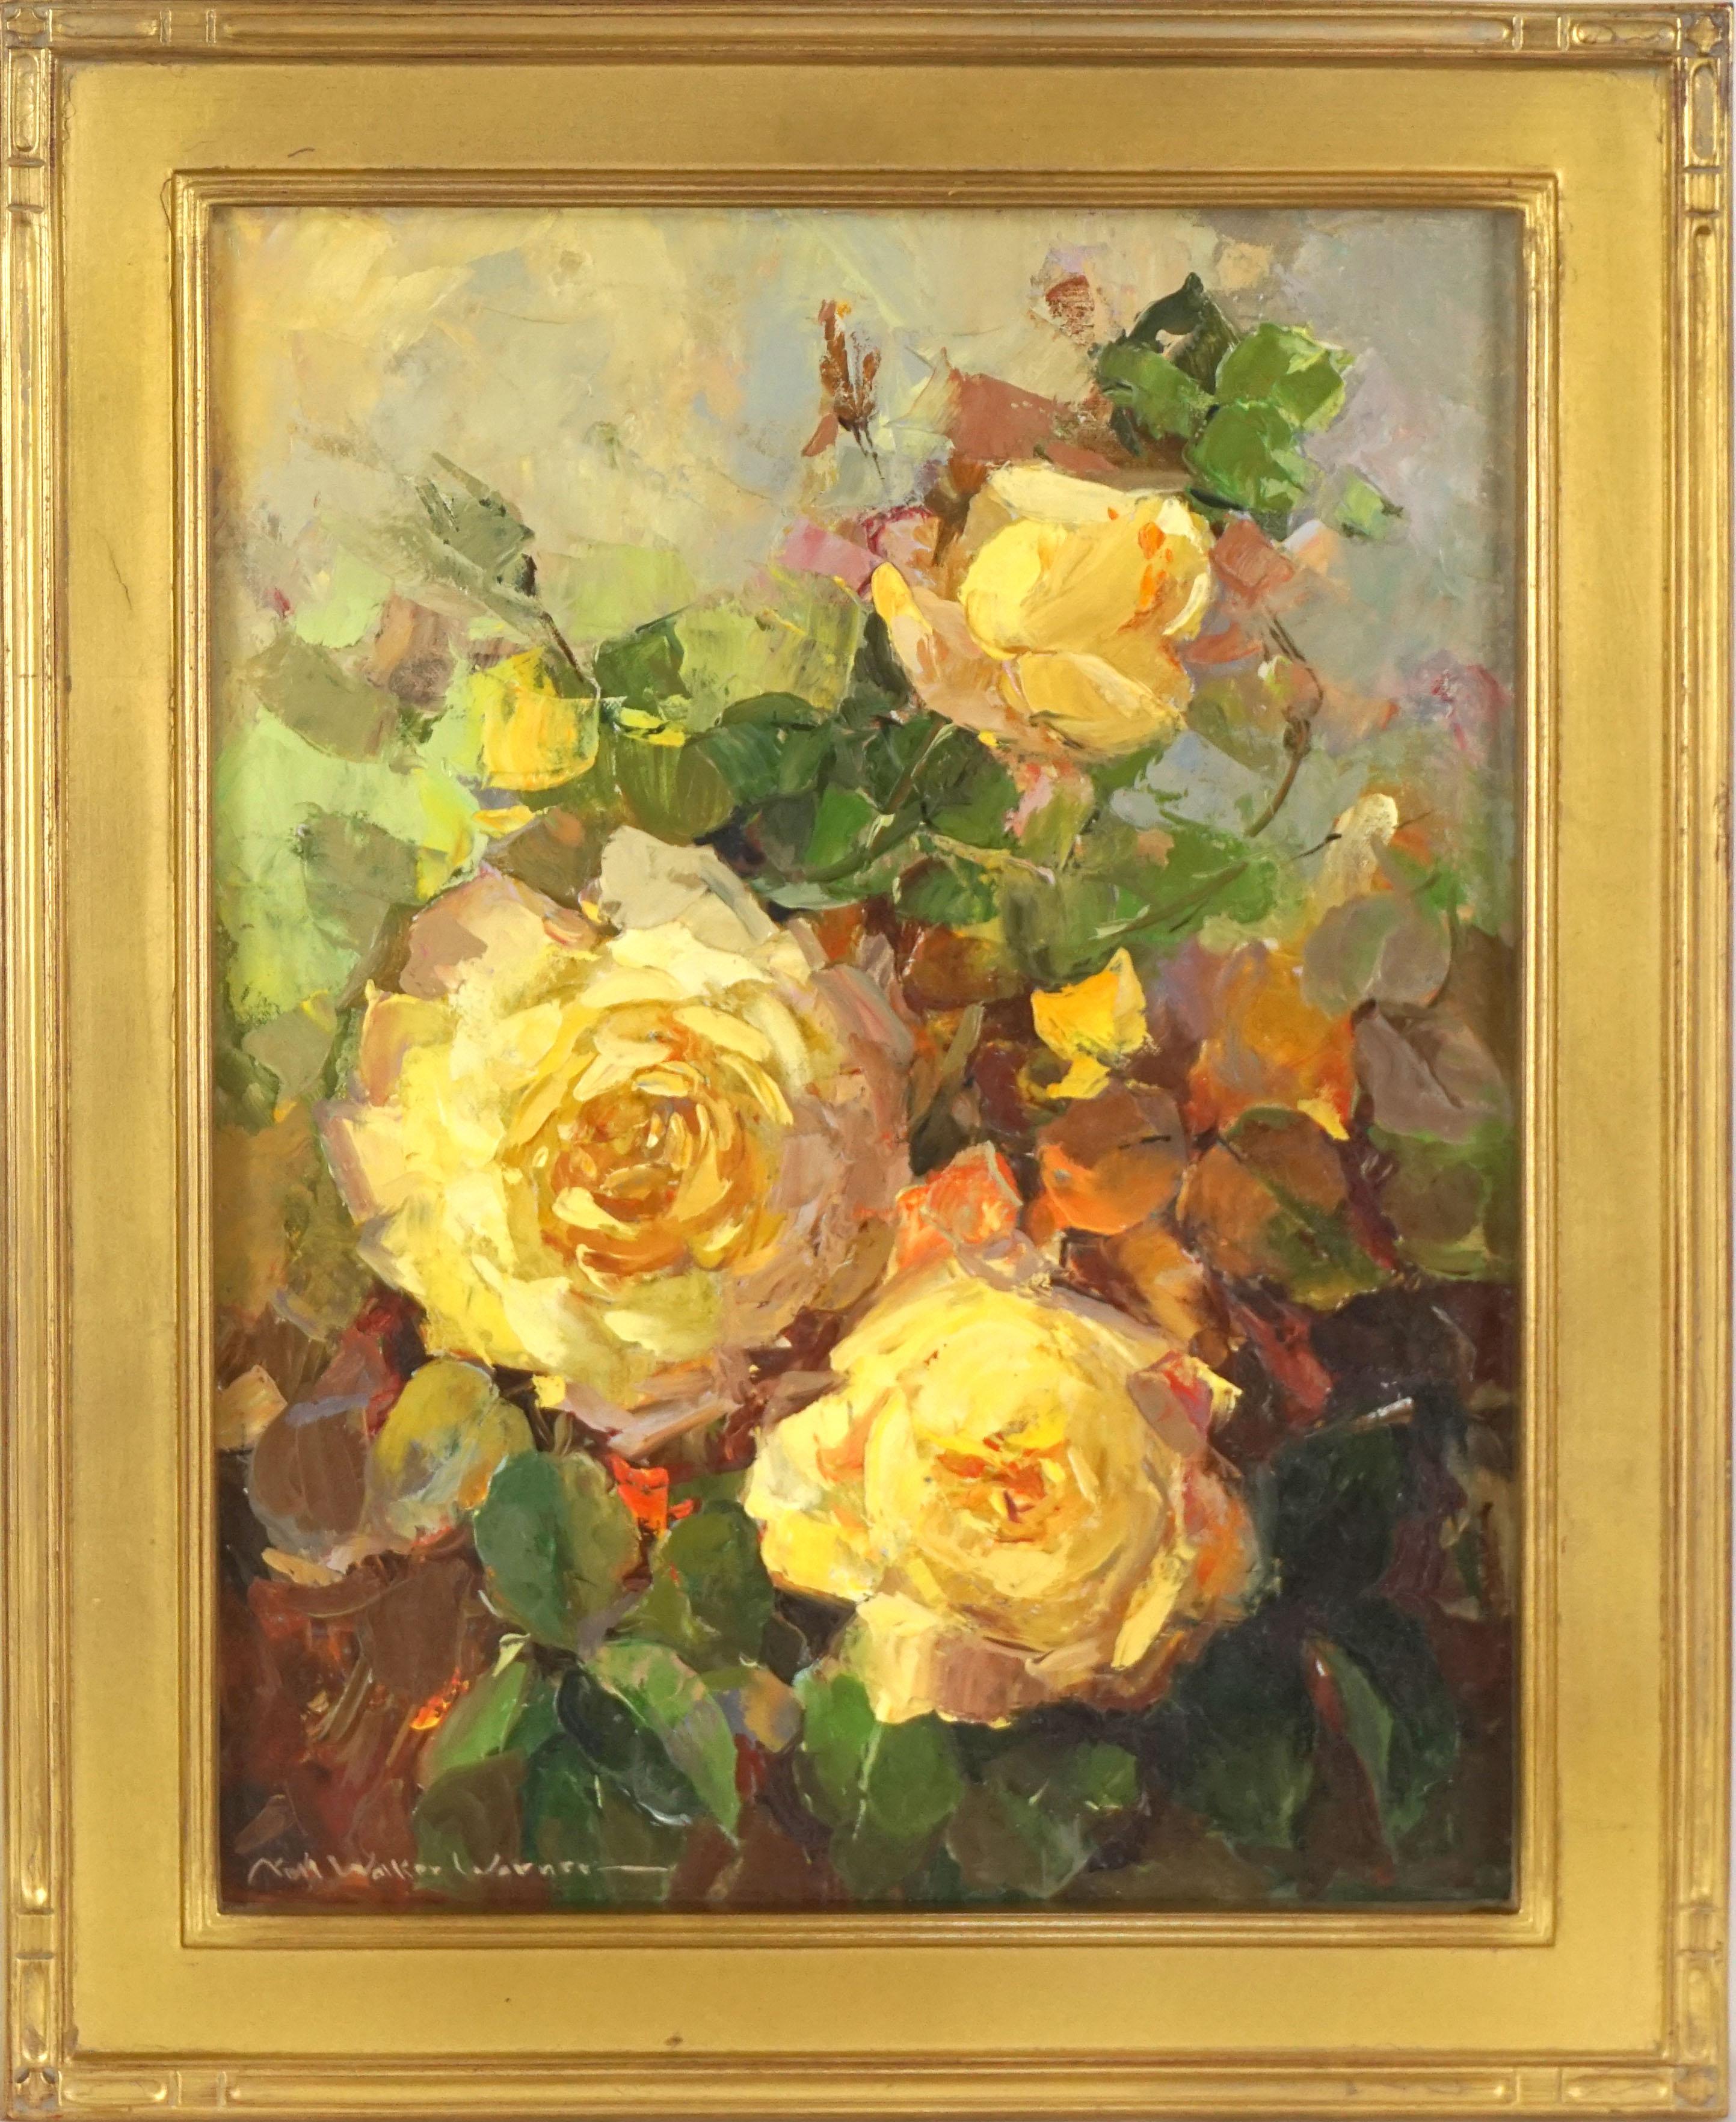 1940's Original Oil Painting of Cheerful Yellow Roses by Nell Walker Warner

Antony Anderson, art critic of the Los Angeles Times, stated Nell Walker Shostrum Warner (American, 1891-1970) was one of the ablest flower painters America has produced.